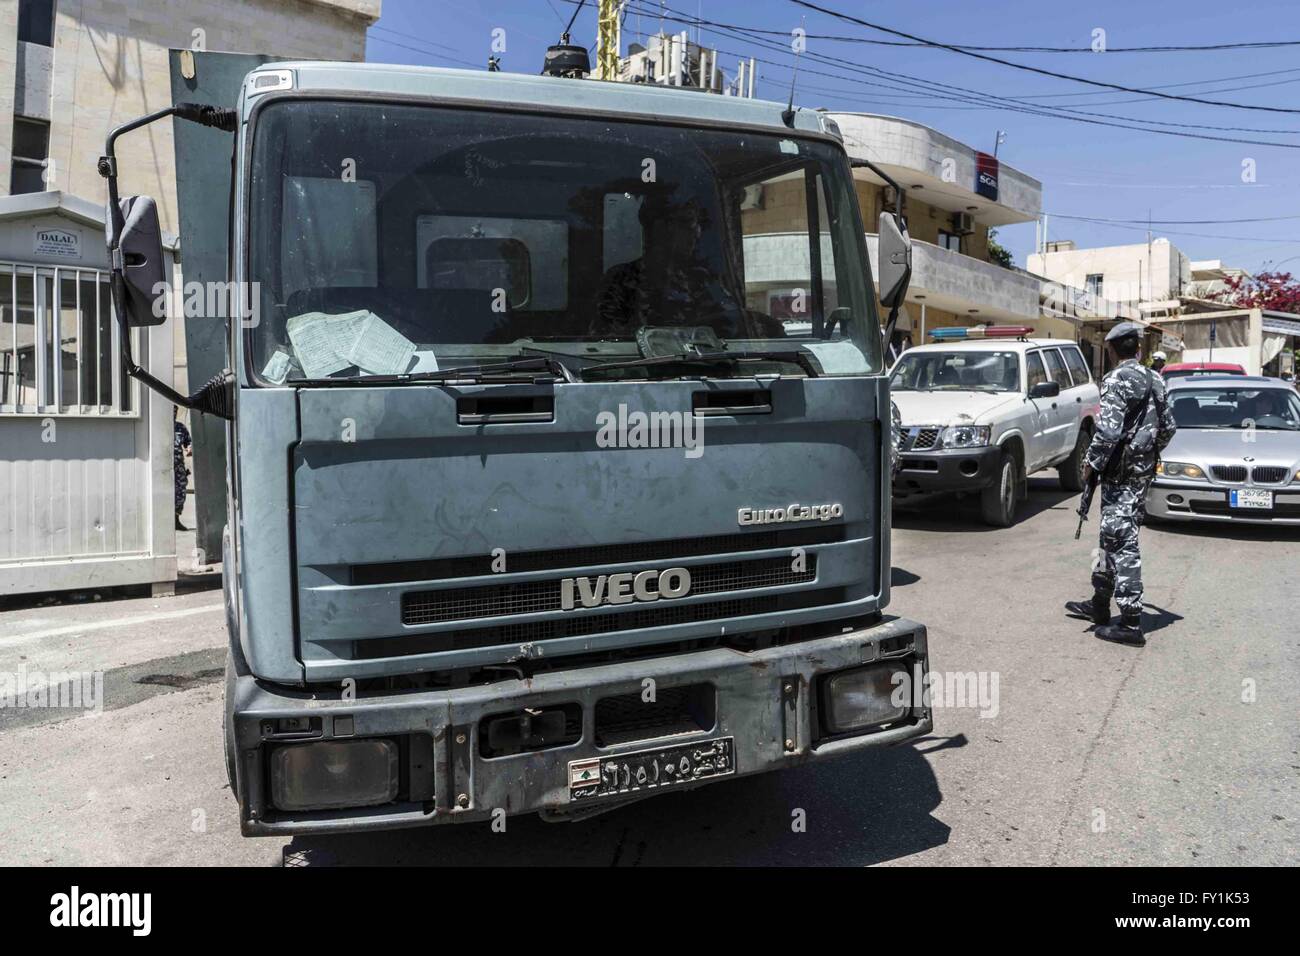 Beirut, Lebanon. 20th Apr, 2016. April 20, 2016 - Baabda Court House, Beirut, Lebanon: Truck transporting Sally Faulkner of Brisbane, Australia, and members of the Australian TV show '60 Minutes', a Nine Network production, are being held after abducting her two children from the custody of her estranged husband, Ali Zeid al-Amin, a surfing instructor who lives south of the Lebanese capital, Beirut. Tara Brown, the presenter famous from 60 Minutes, reporter Stephen Rice, cameraman Ben Williamson and sound recordist David Ballment were arrested while in Beirut to cover the story of Brisbane Stock Photo